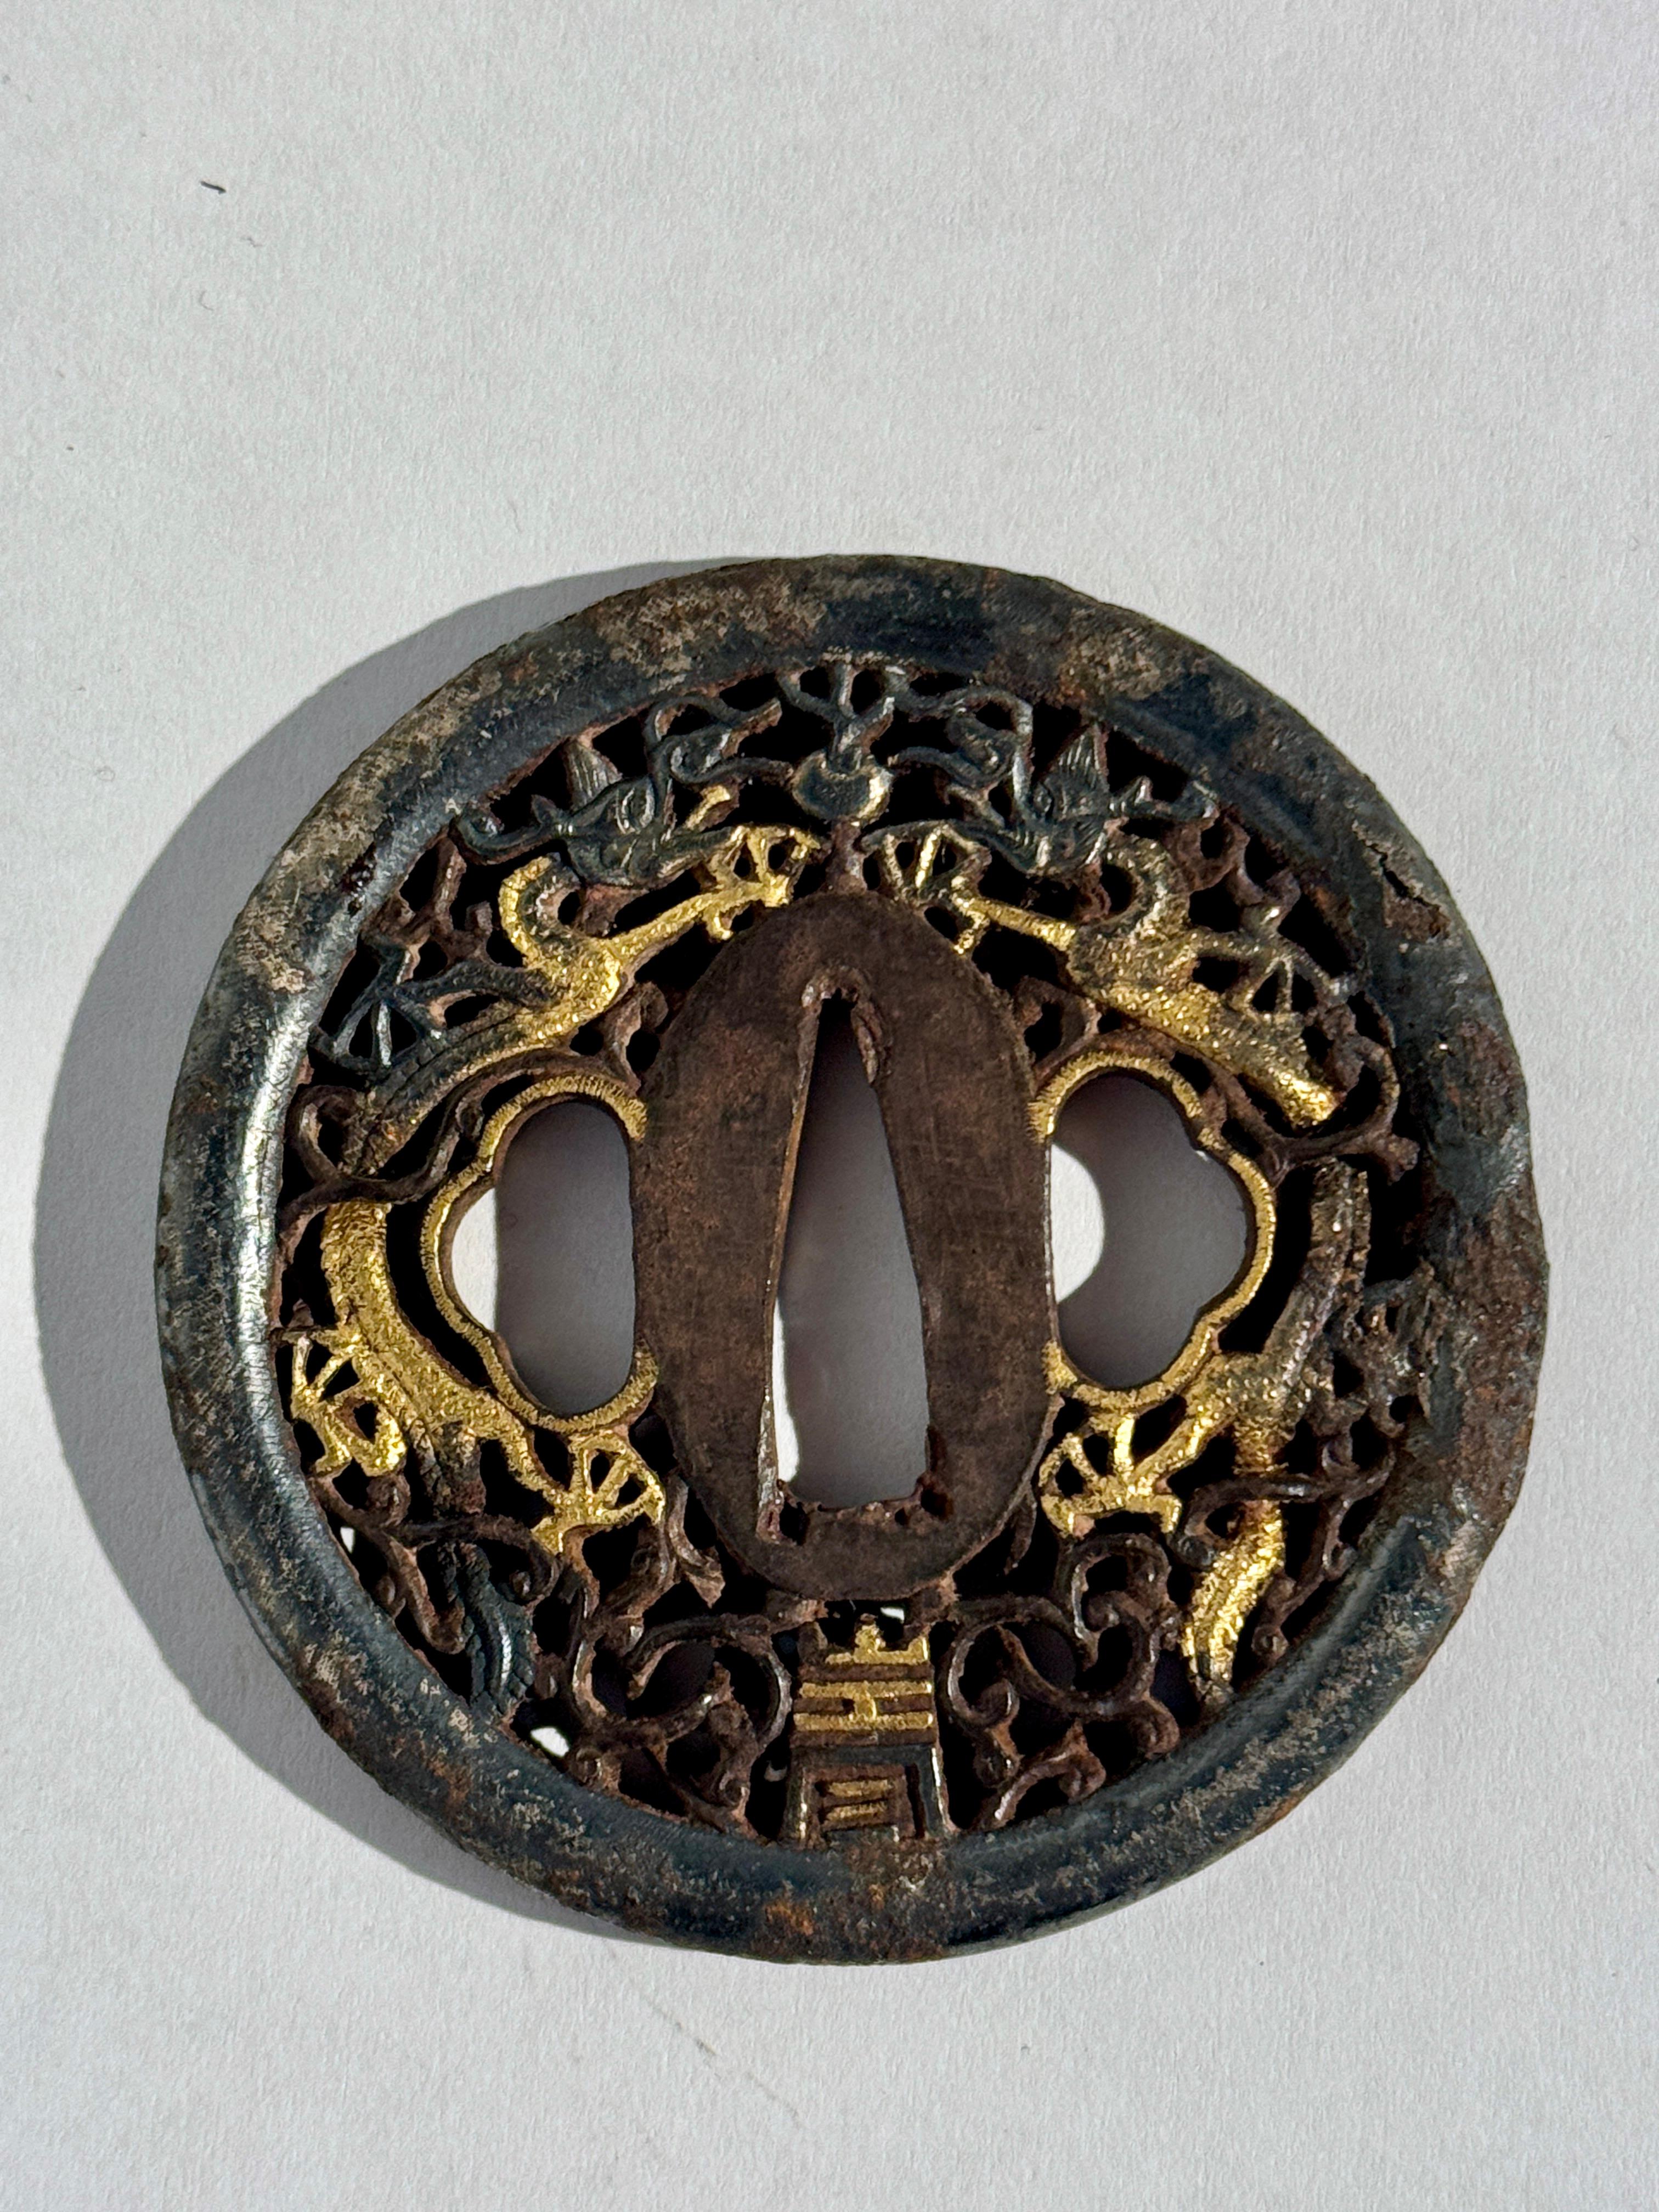 A dramatic Japanese iron tsuba in the nanban (foreign) style, decorated with dragons and openwork and inlaid with silver and gold, Edo Period, early 19th century, Japan.

The fantastic tsuba of circular form featuring a pair of writing dragons